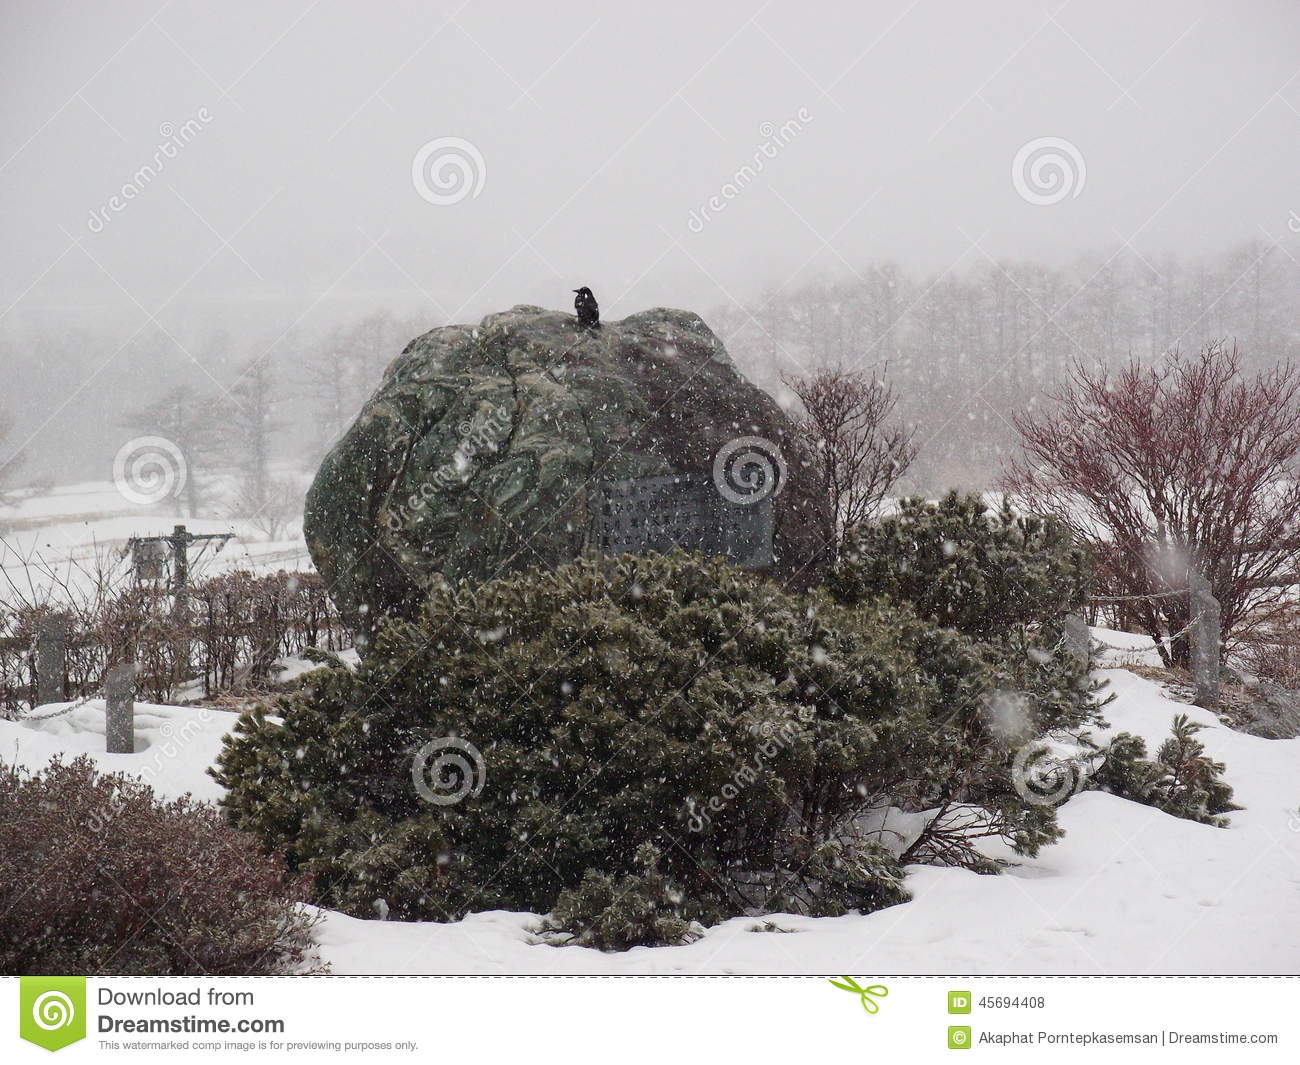 Crow On The Rock Under Snow Falling Stock Photo   Image  45694408